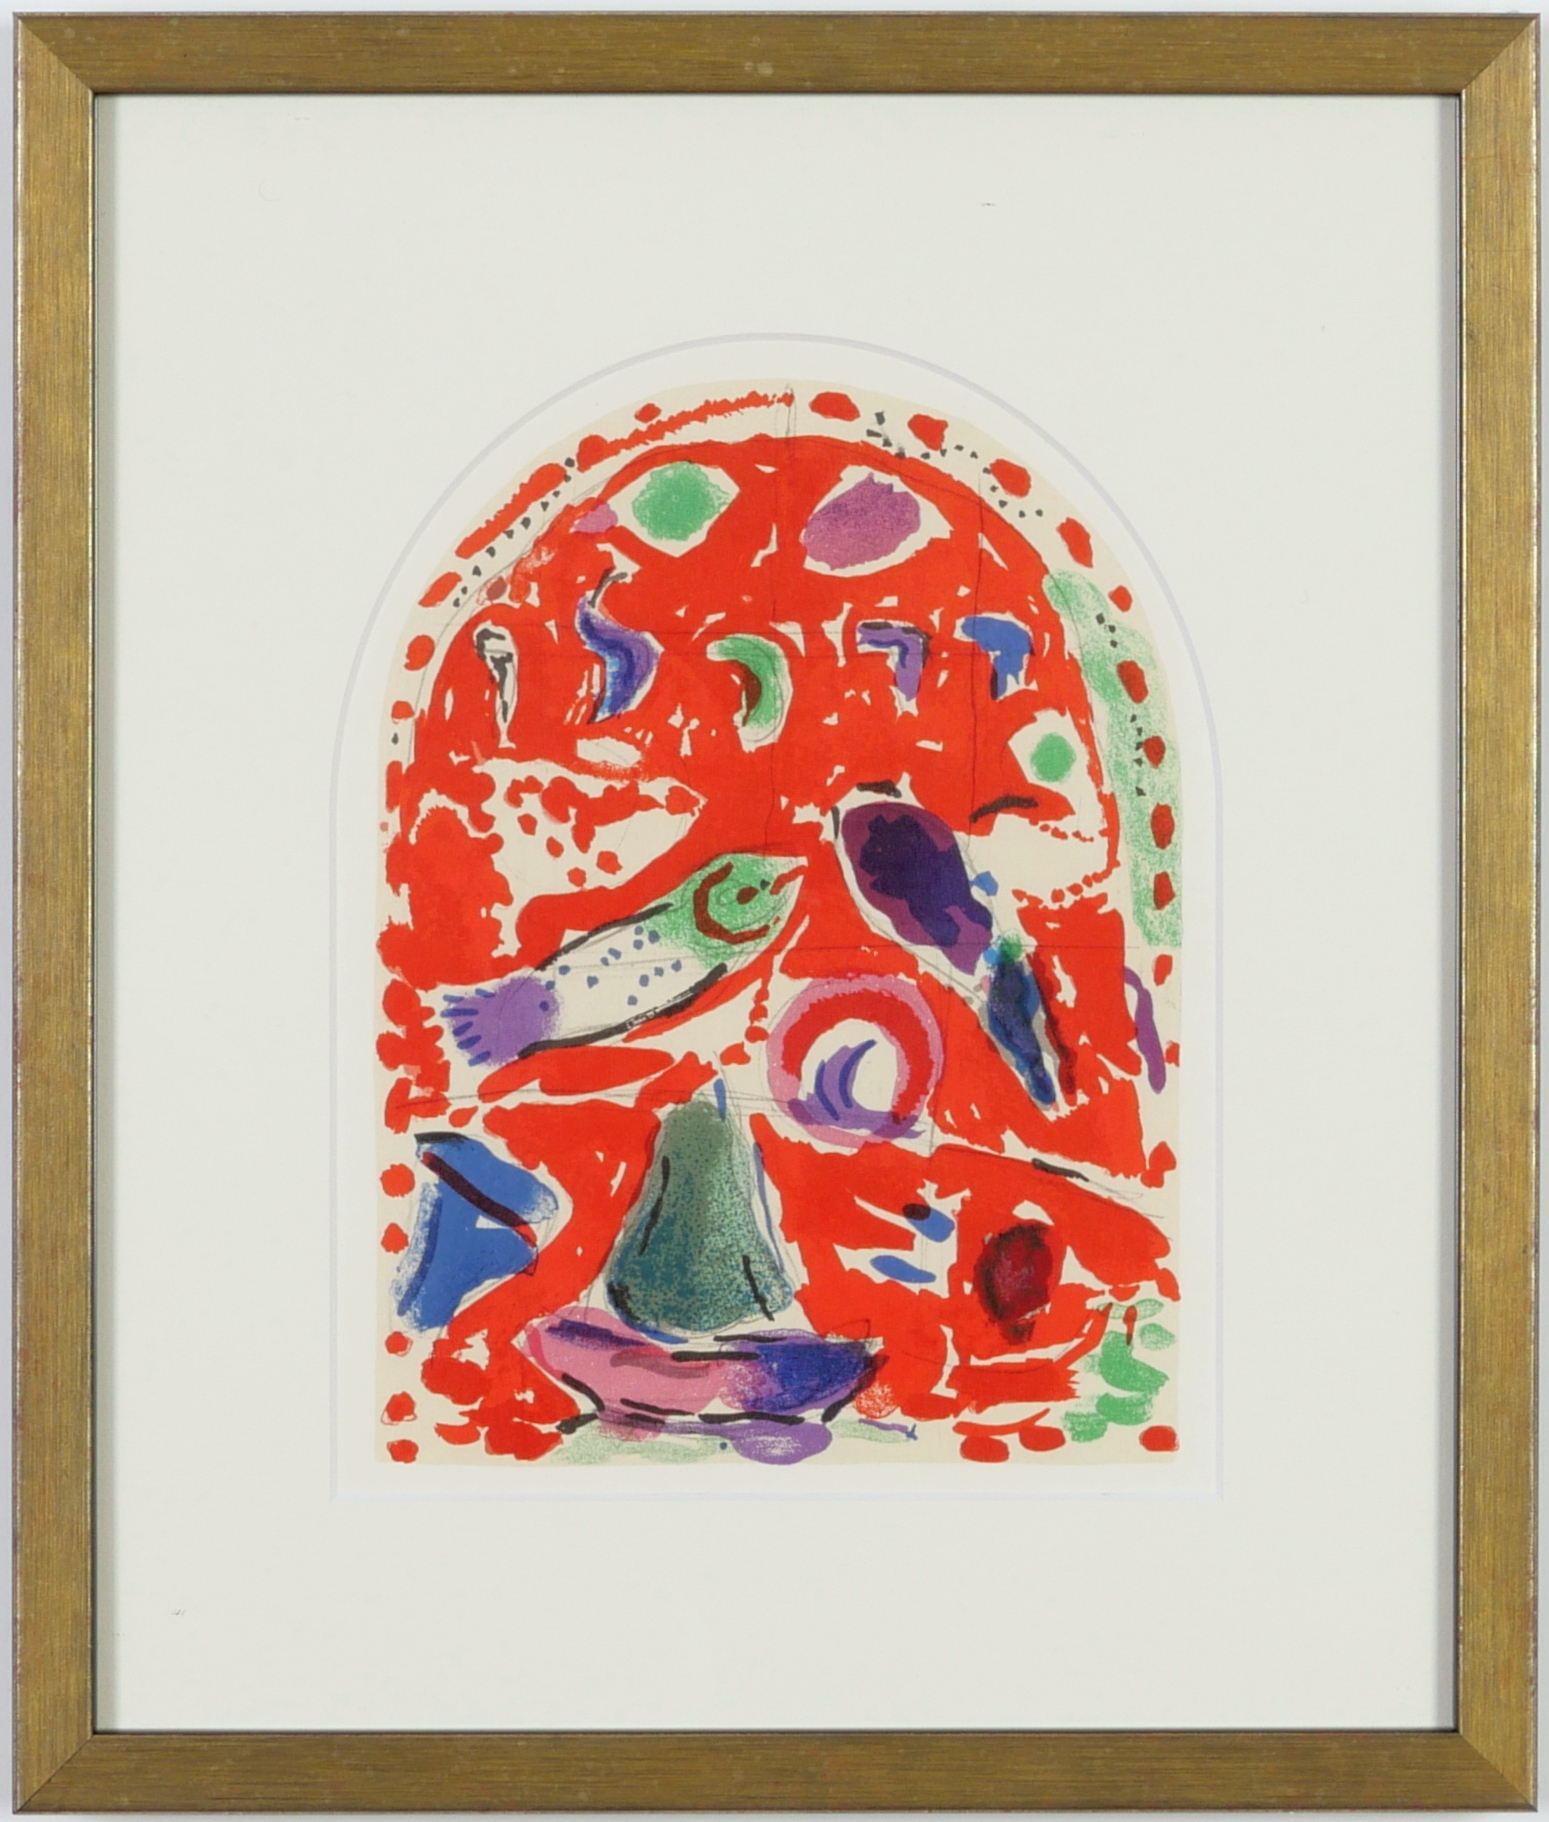 MARC CHAGALL, The Twelve Tribes, twelve lithographs in colour, printed in Paris by Mourlot 1962, - Image 3 of 13